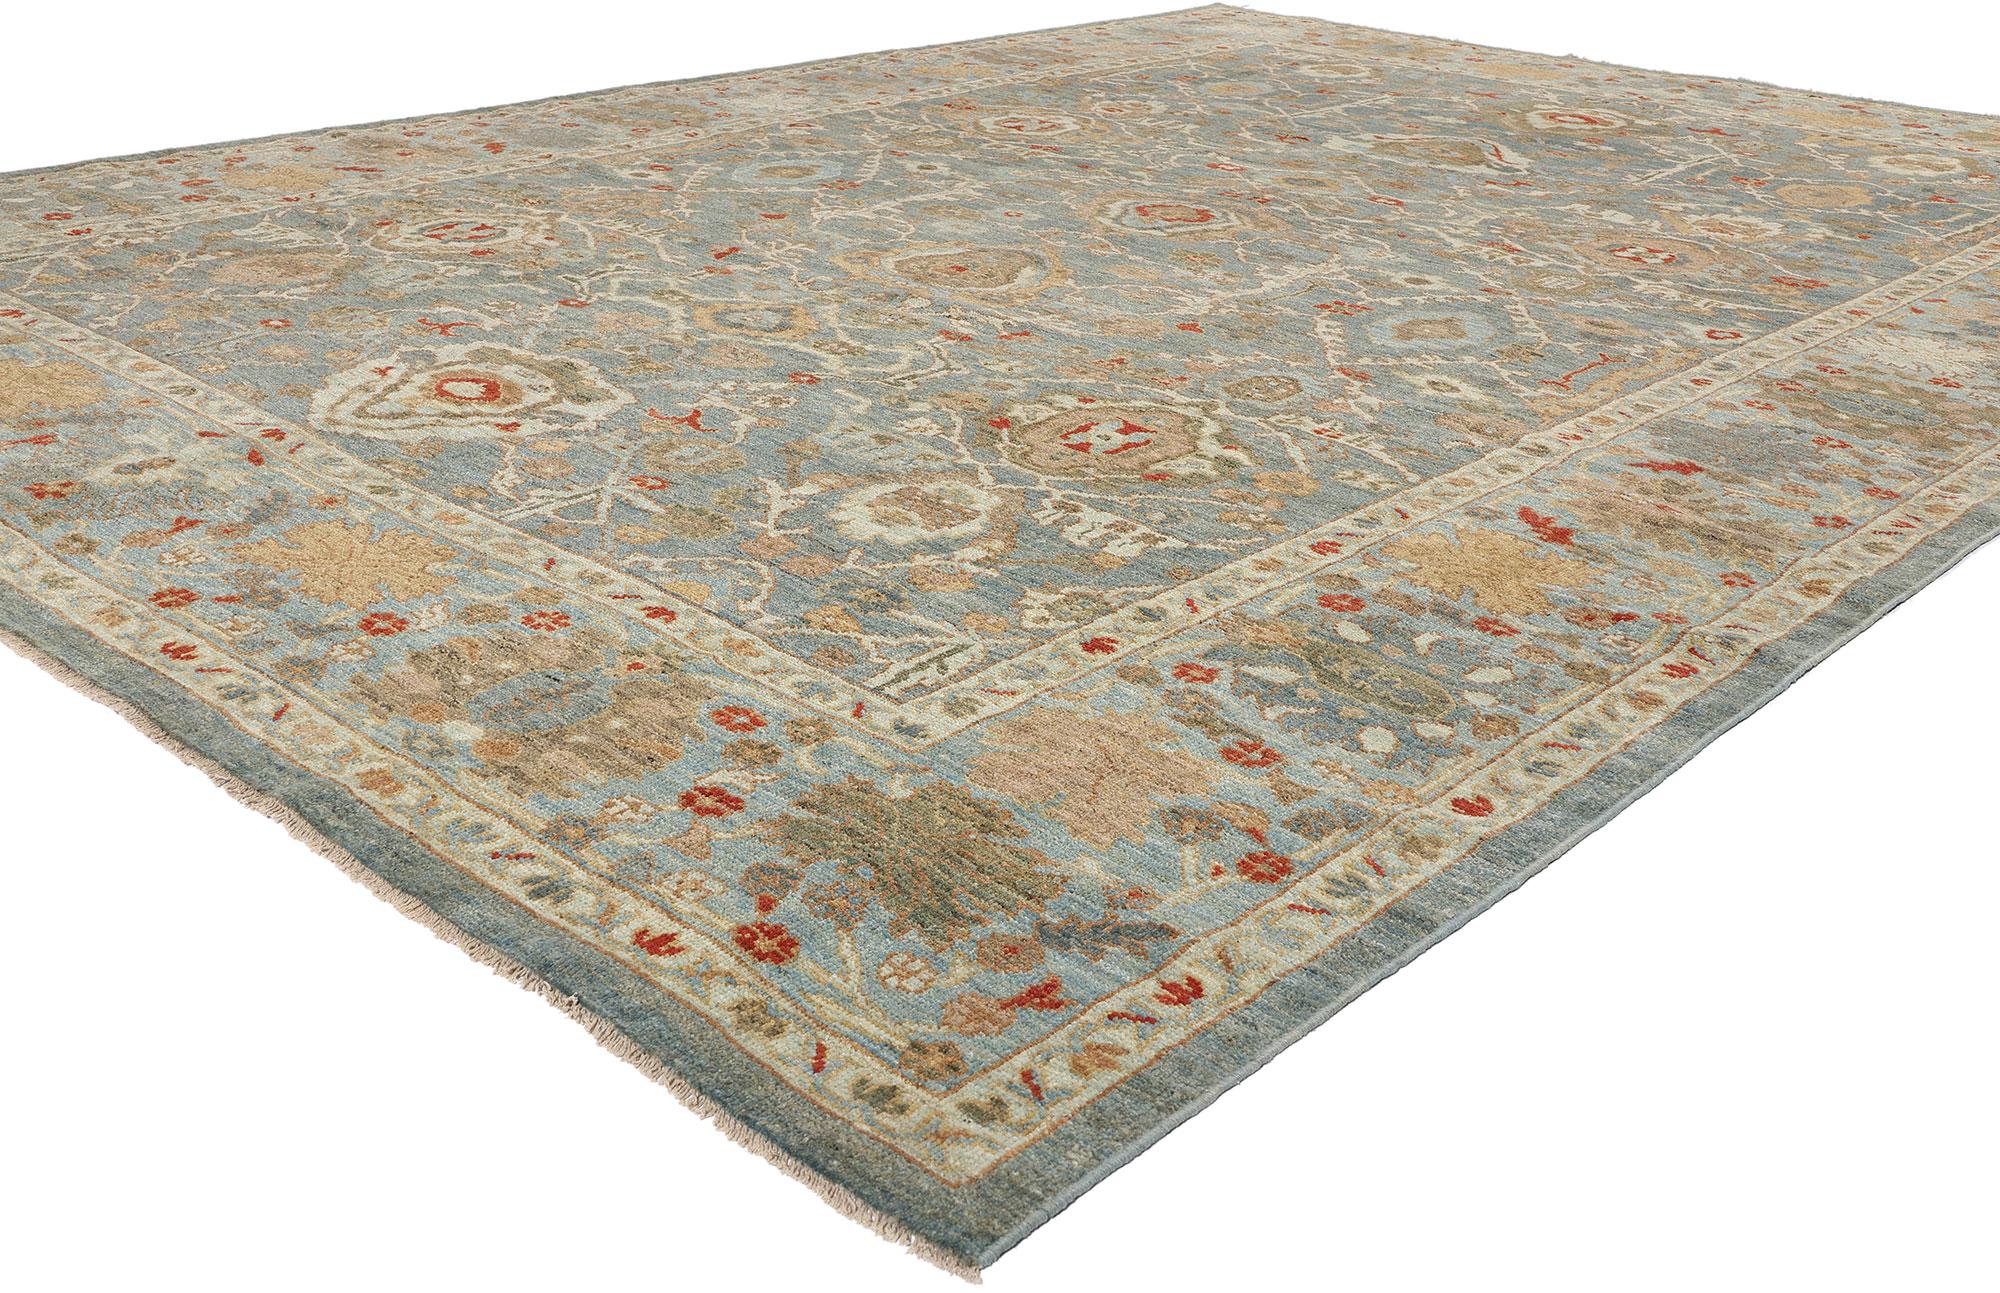 61299 Modern Blue Persian Sultanabad Rug, 10'04 x 14'02. Originating in Iran's Sultanabad region, Persian Sultanabad rugs are renowned for their exceptional craftsmanship, durable materials, and intricate designs. Created with meticulous care by